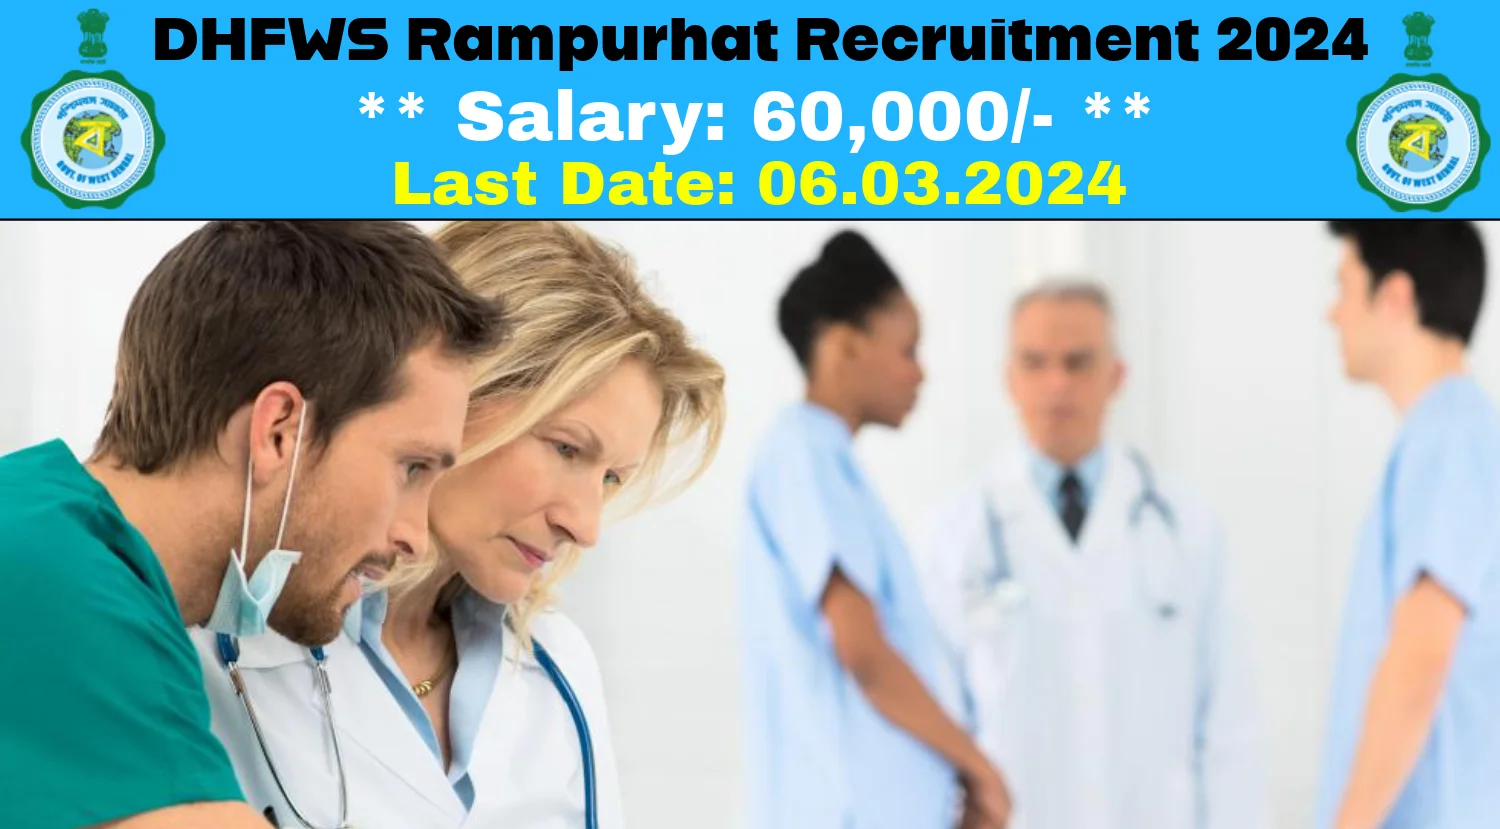 DHFWS Rampurhat Recruitment 2024 for MO & Specialist Posts